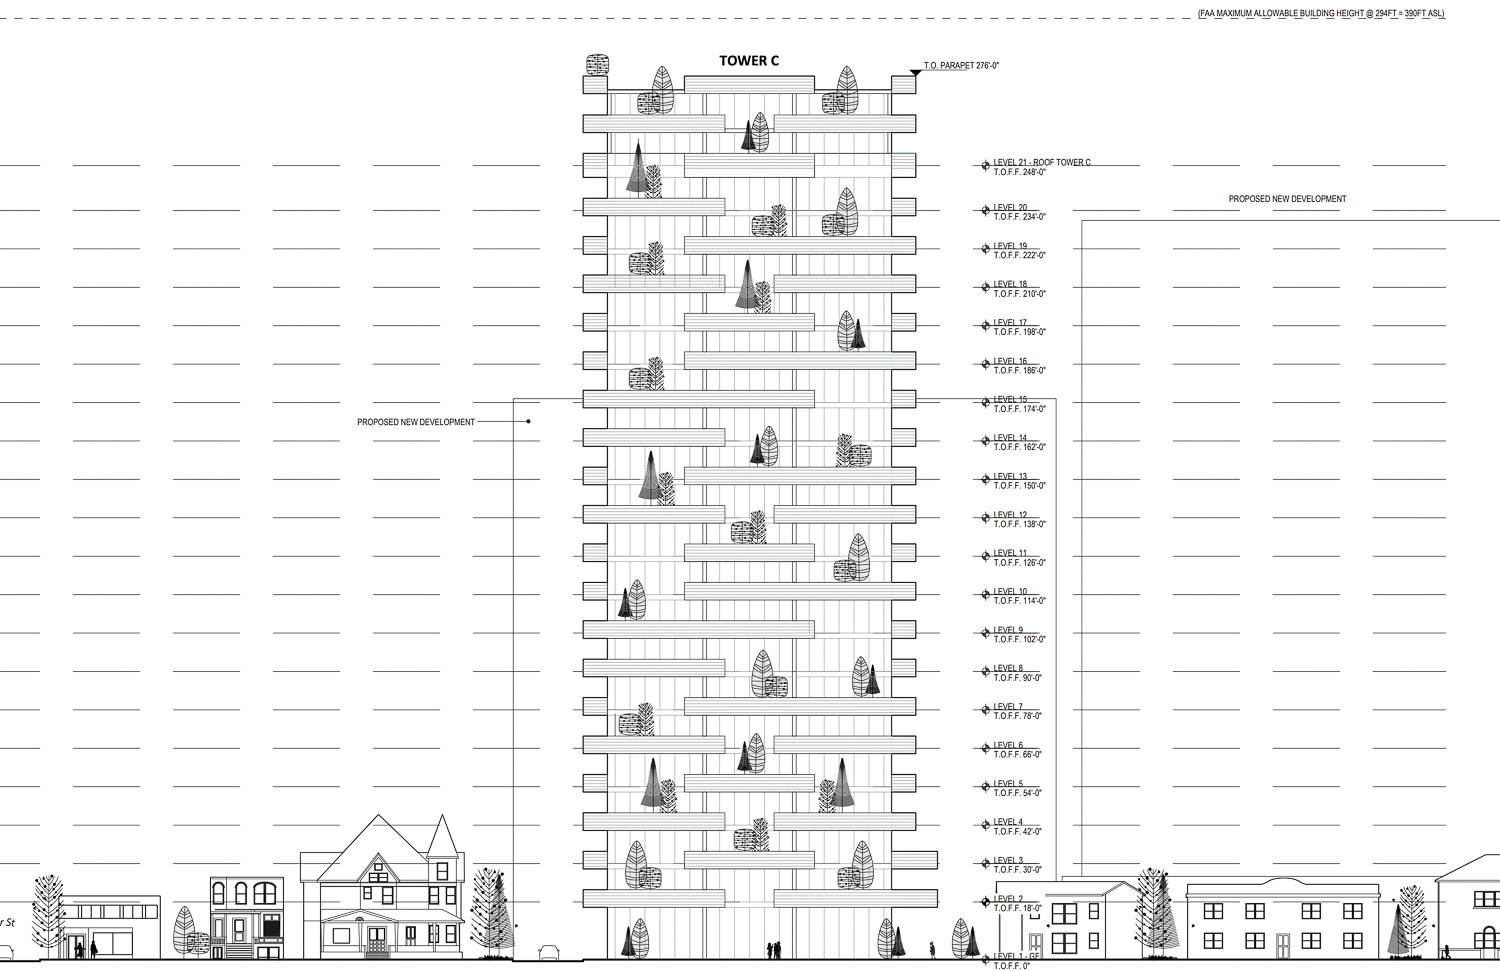 420 South 3rd Street Tower C elevation, illustration by RMW Architecture